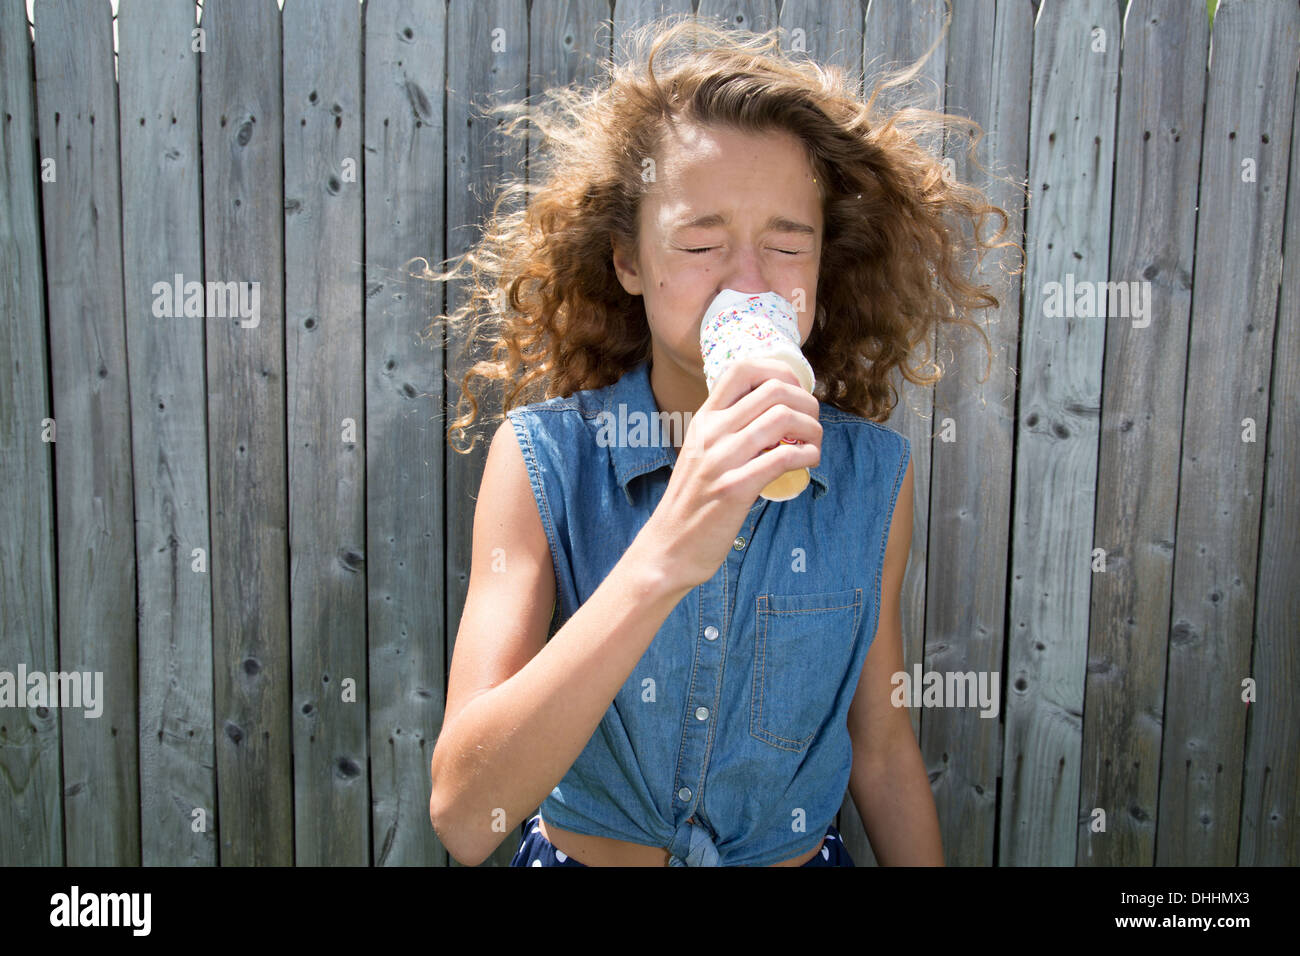 Teenage girl eating ice cream cone Banque D'Images